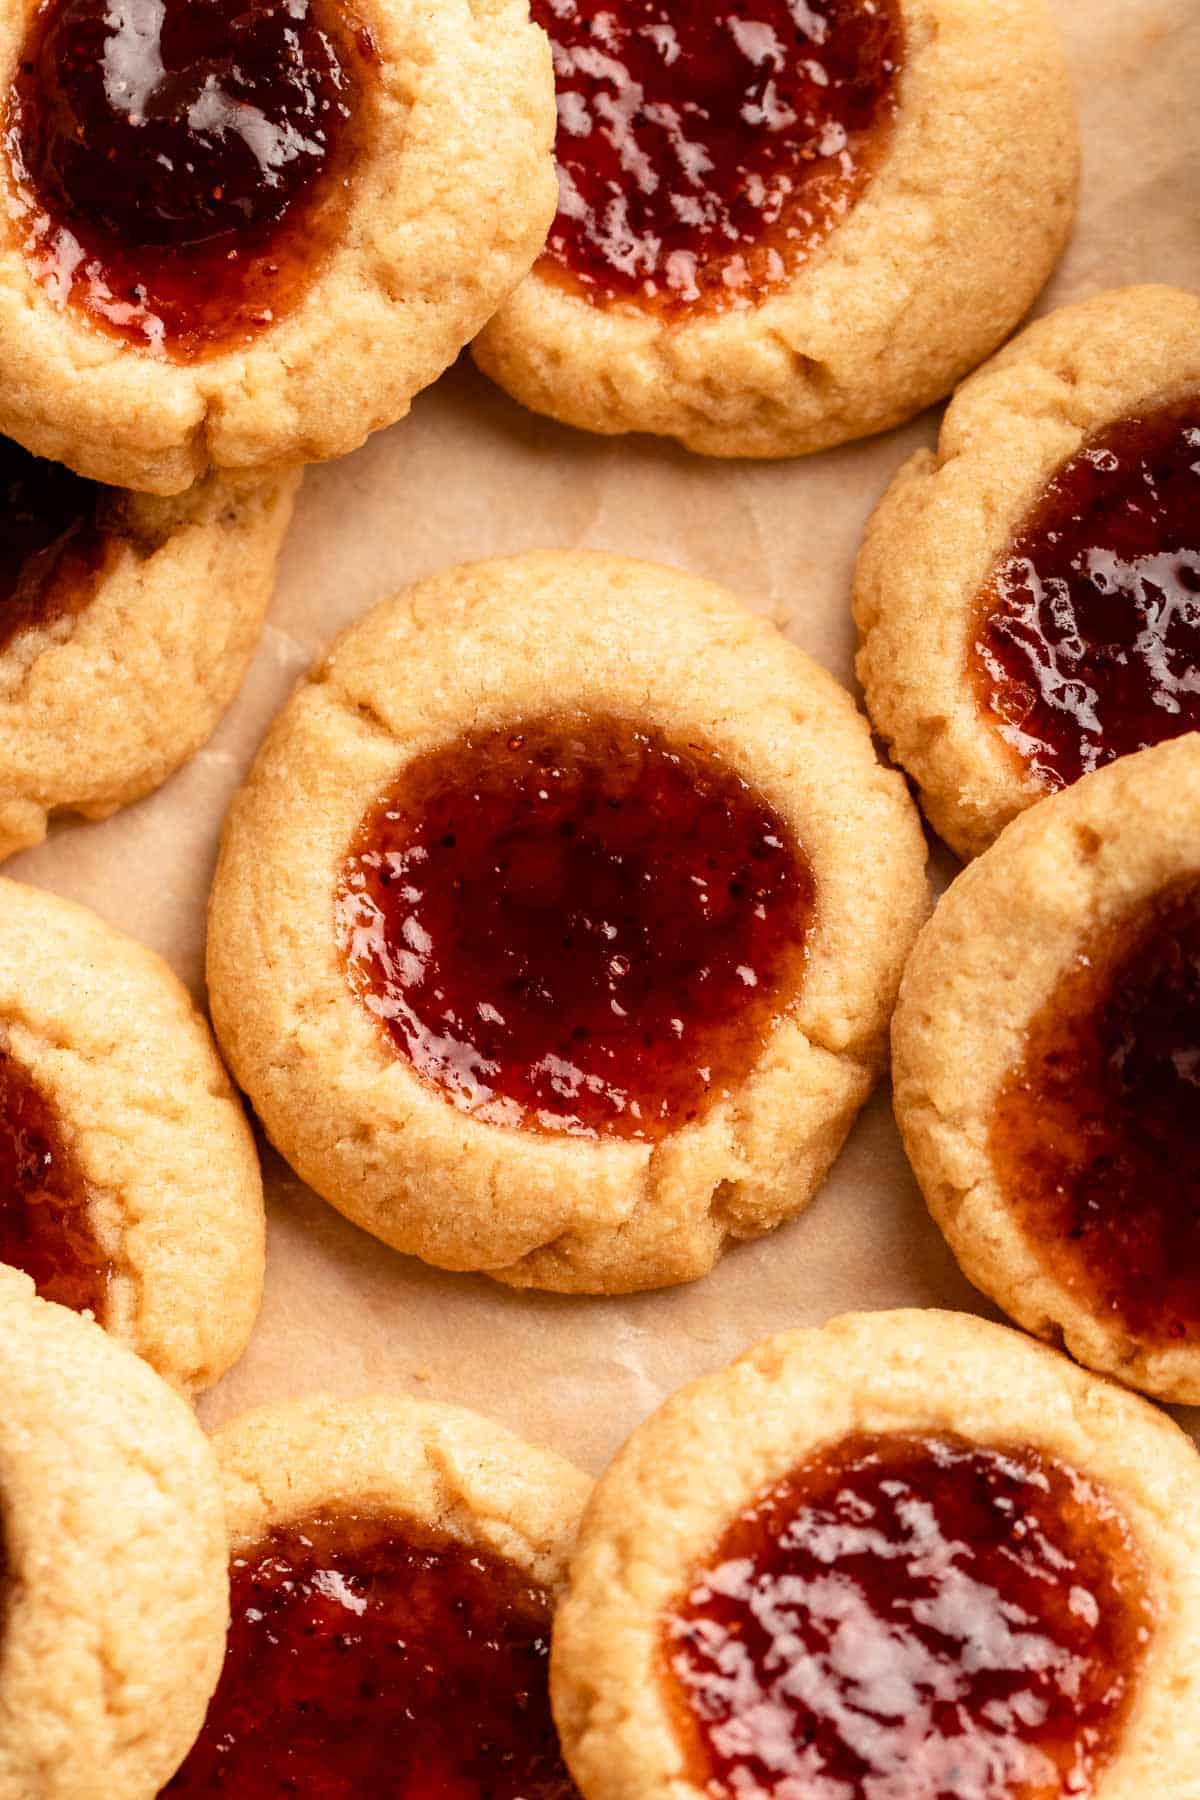 Top of peanut butter and jam cookies.